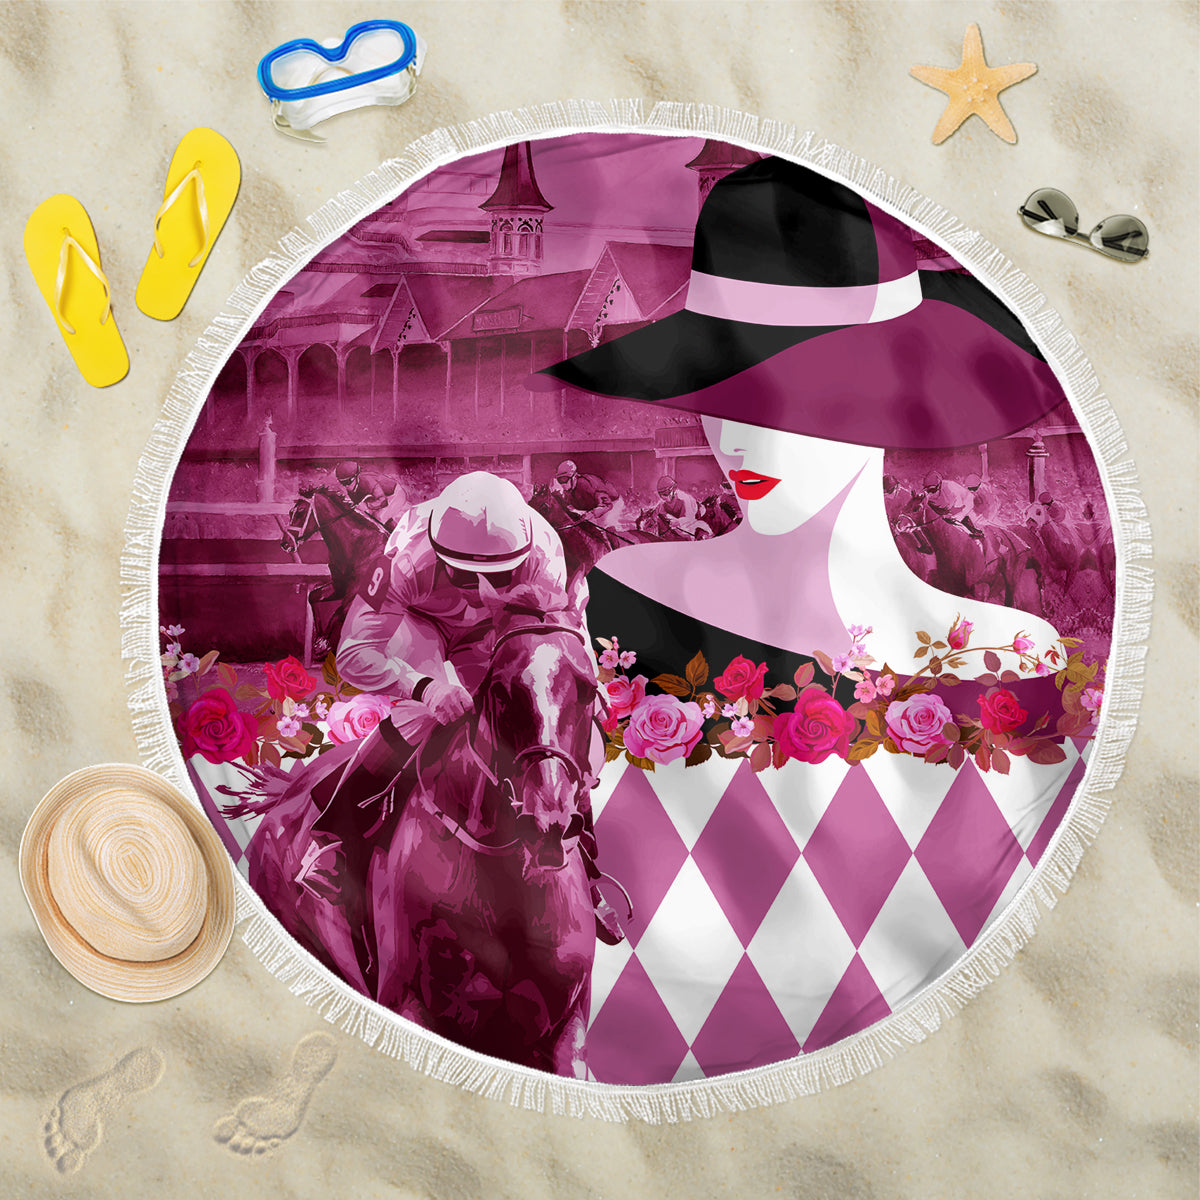 Kentucky Racing Horses Derby Hat Lady Beach Blanket Churchill Downs and Roses Pink Out